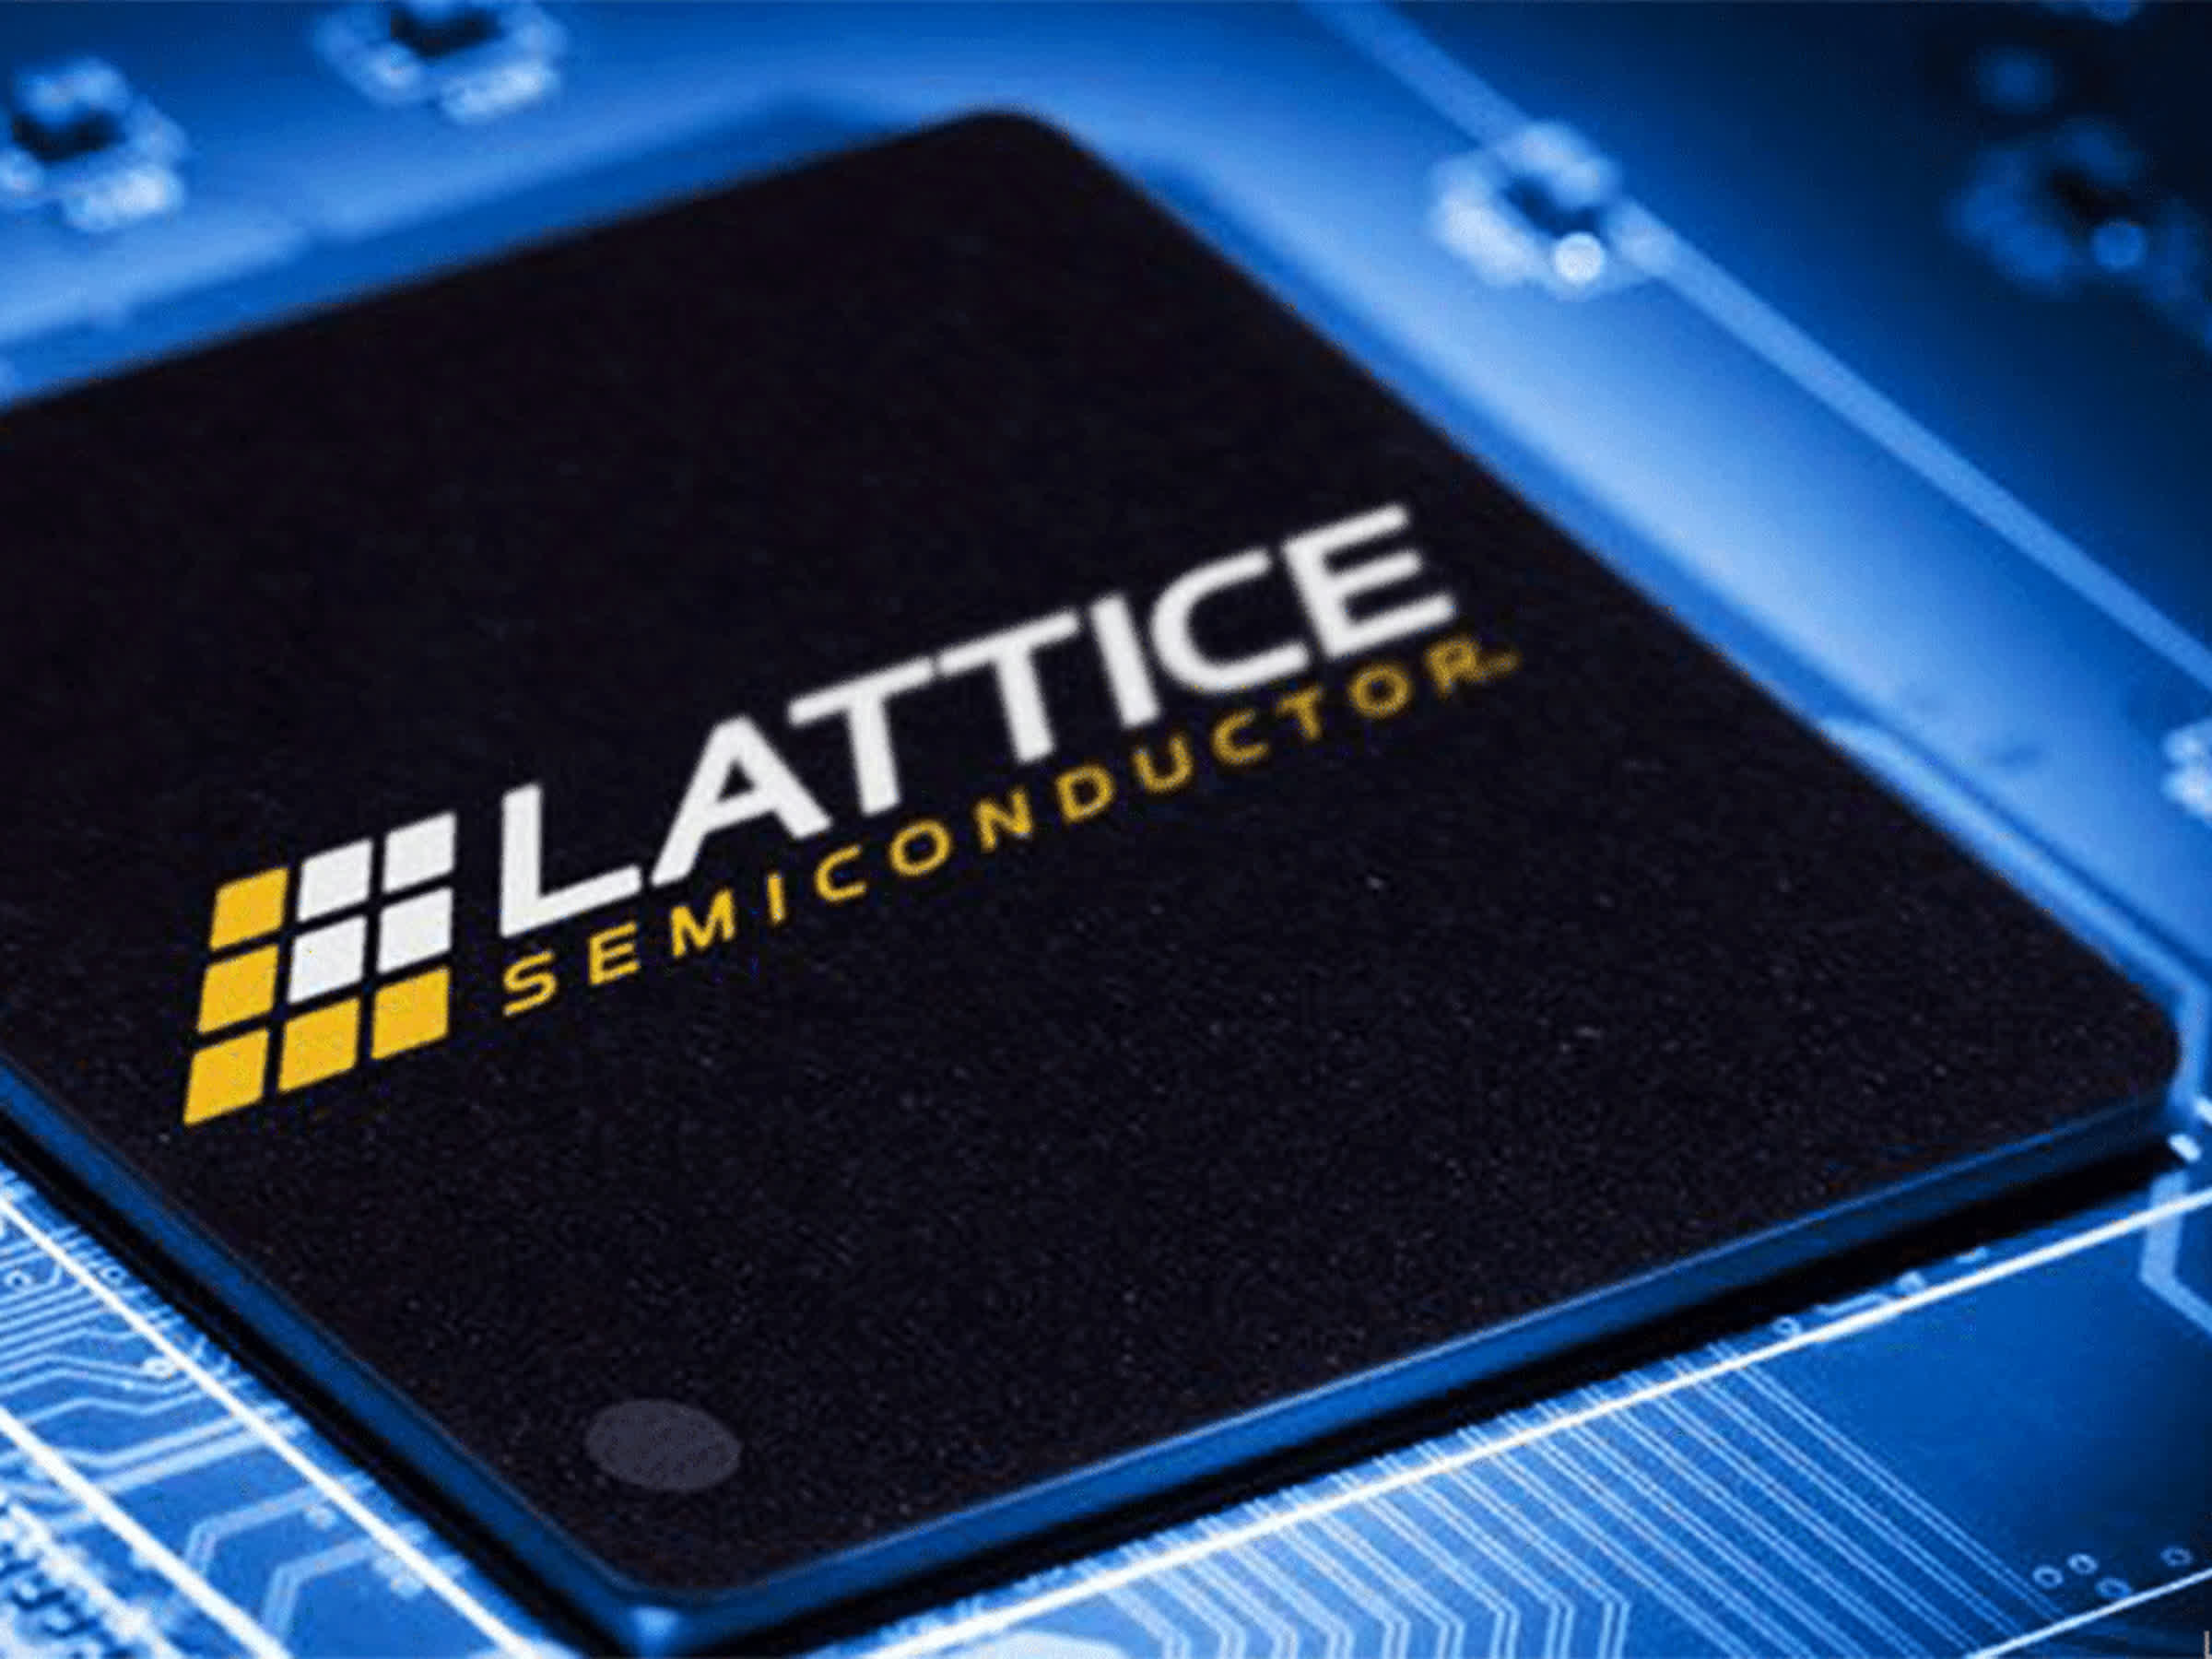 Lattice Semiconductor expands to mid-range FPGAs, goes after Intel's Arria and AMD's Xilinx offerings